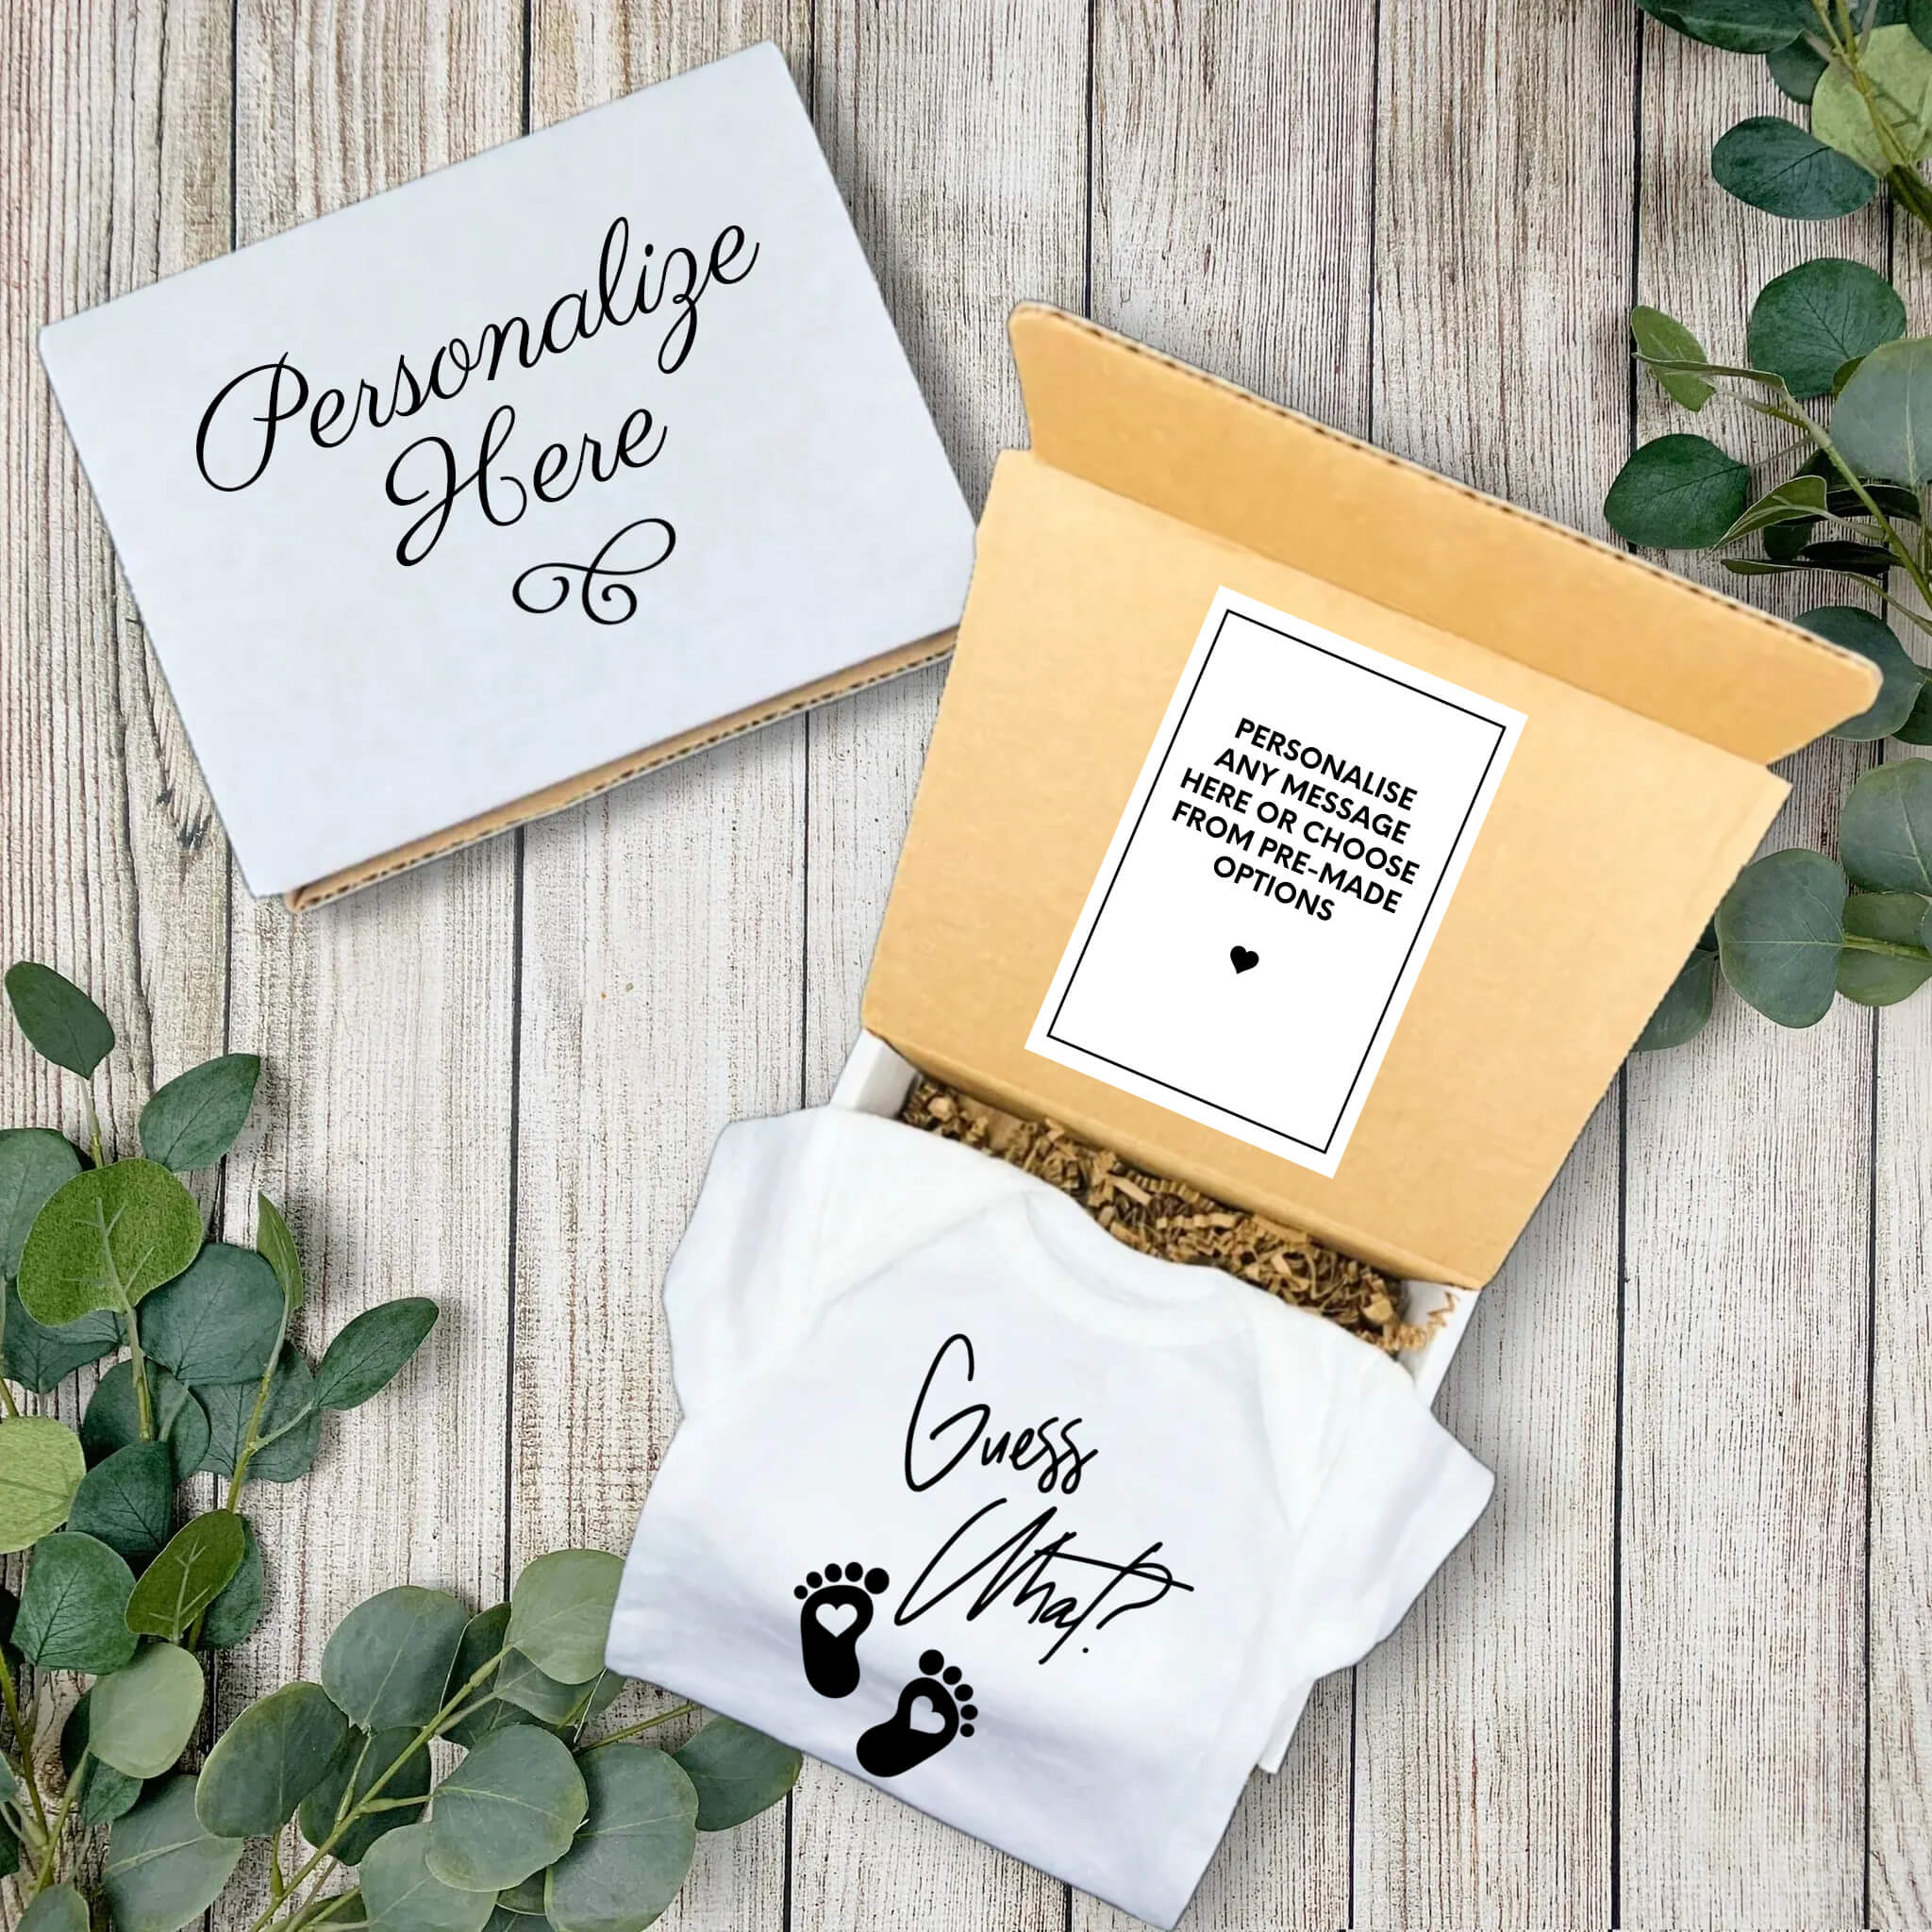 Personalized Pregnancy Announcement, Guess What? Dad, Grandma, Grandpa, Auntie, Uncle To Be, Customized Baby Announcement Onesie